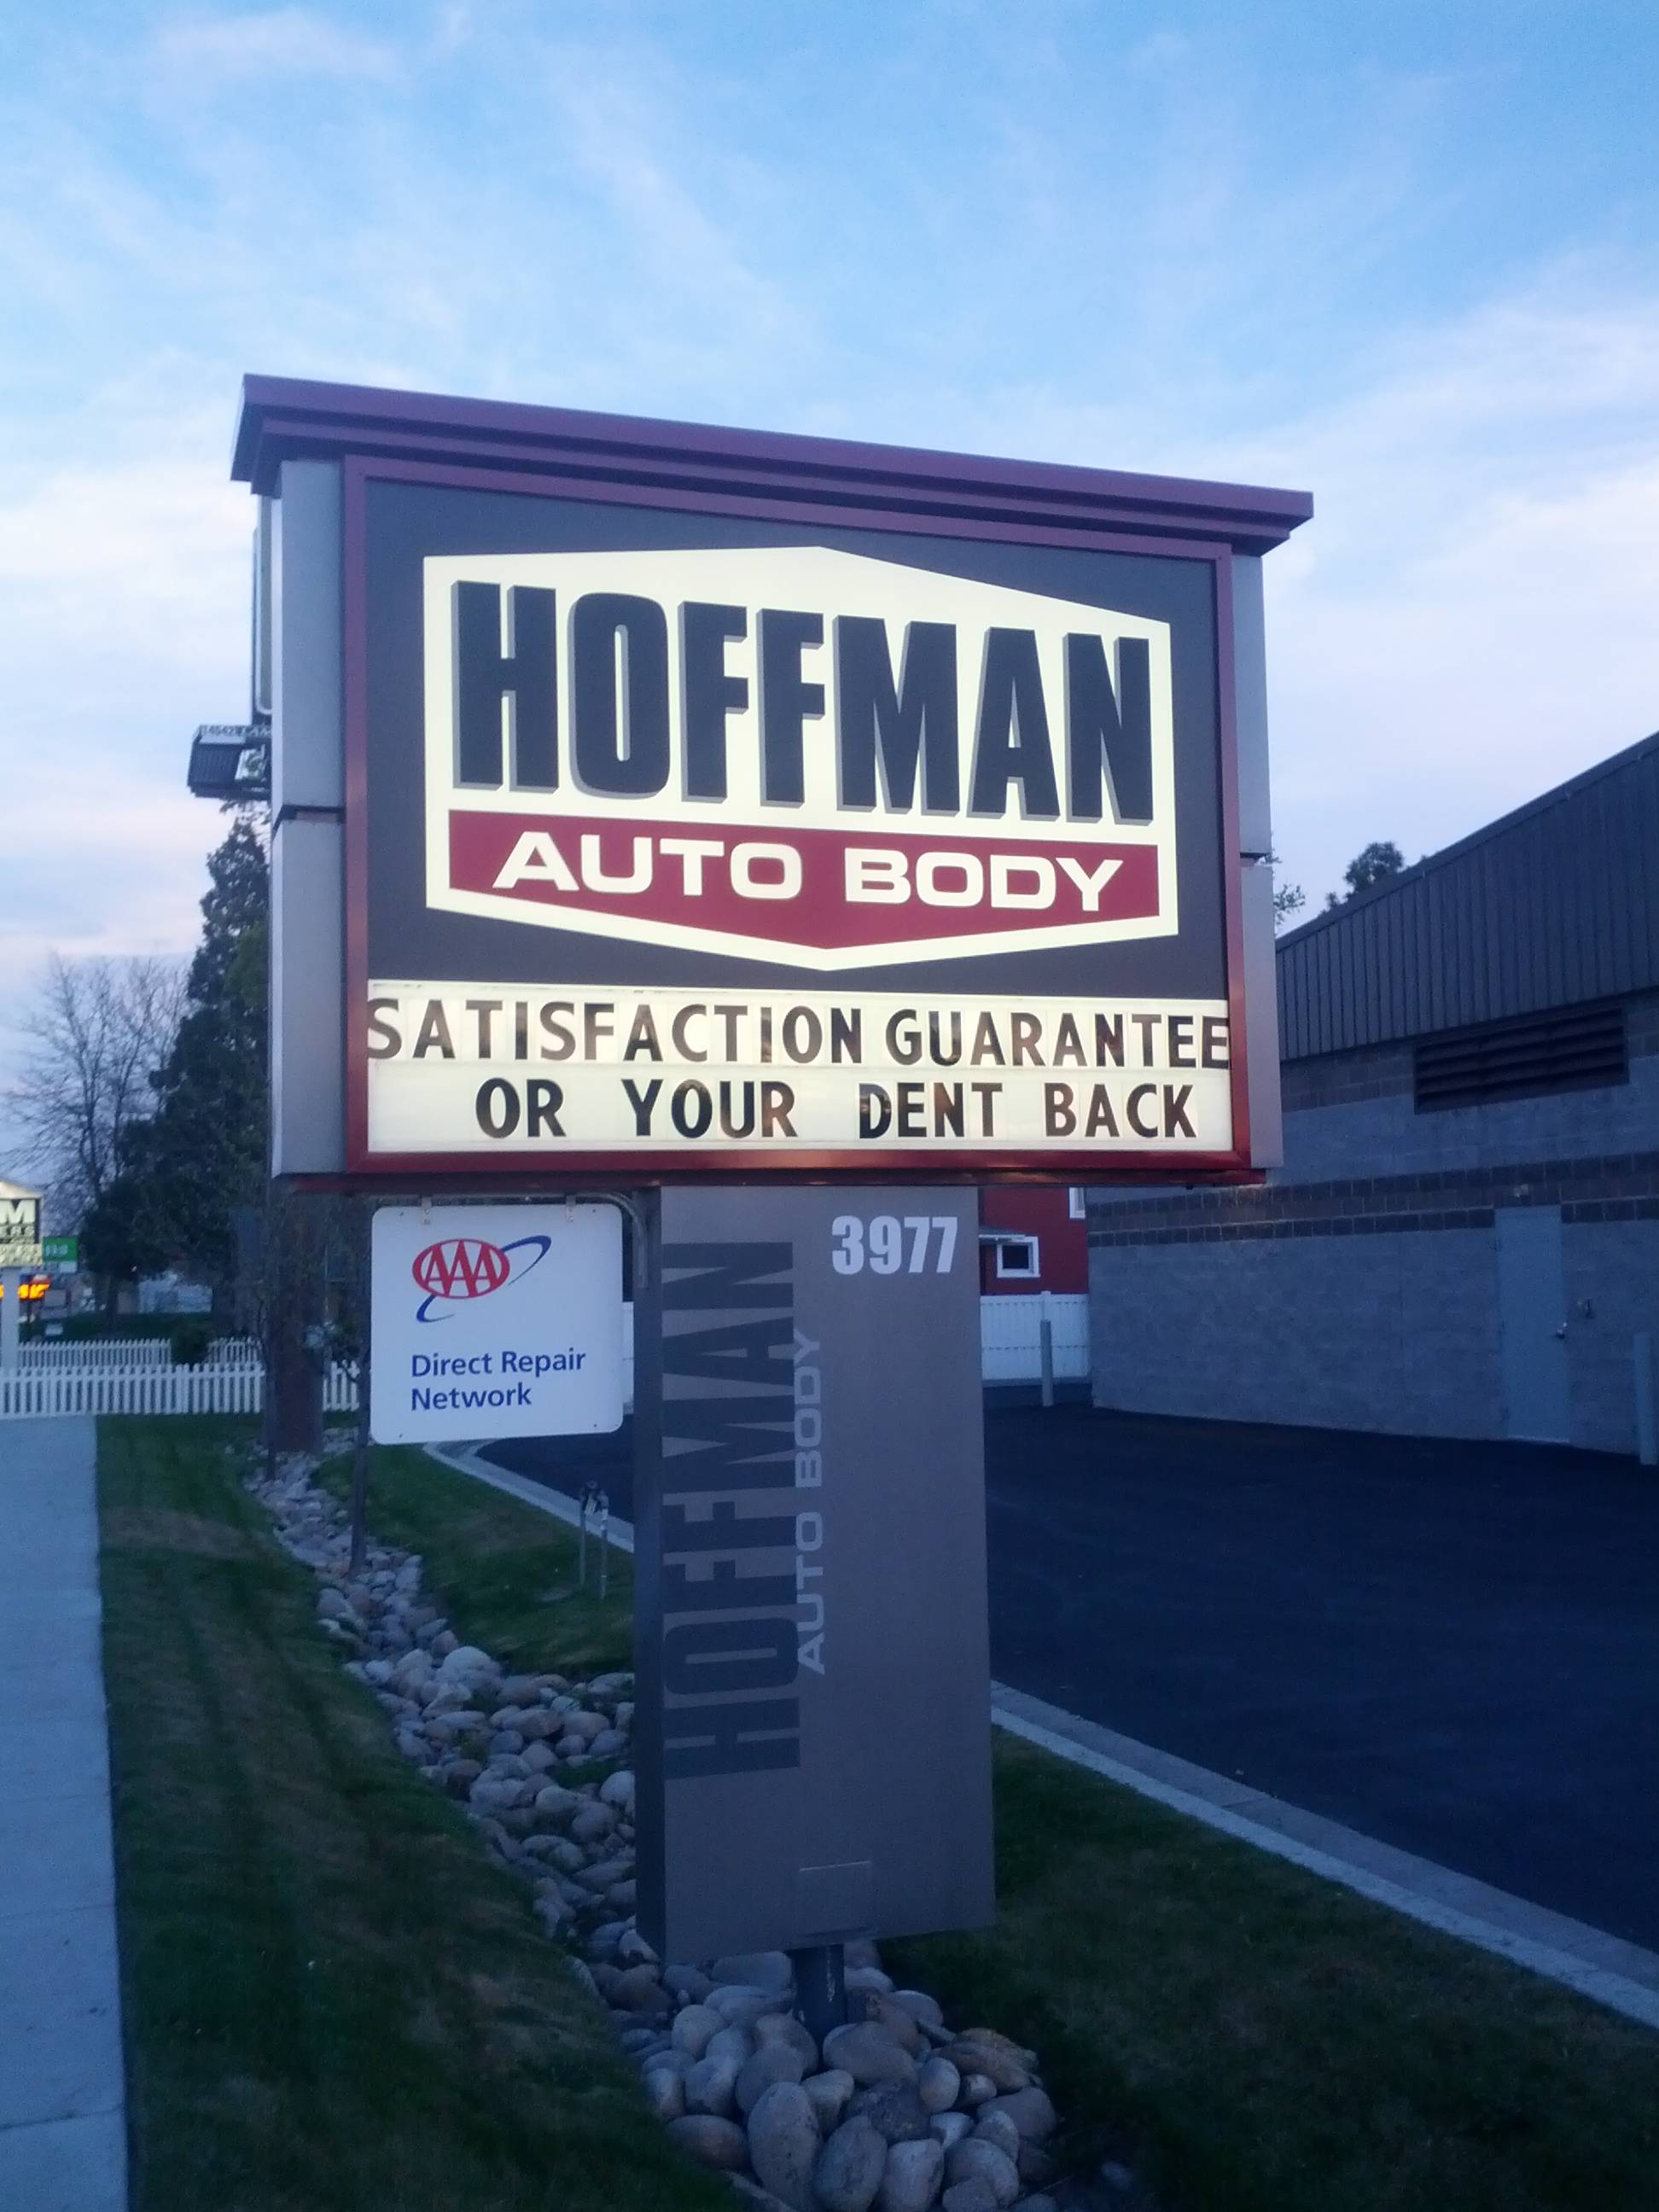 funny tire shop signs - Hoffman Auto Body Satisfaction Guarantee Or Your Dent Back 13 442 3977 a Direct Repair Network Auto Body